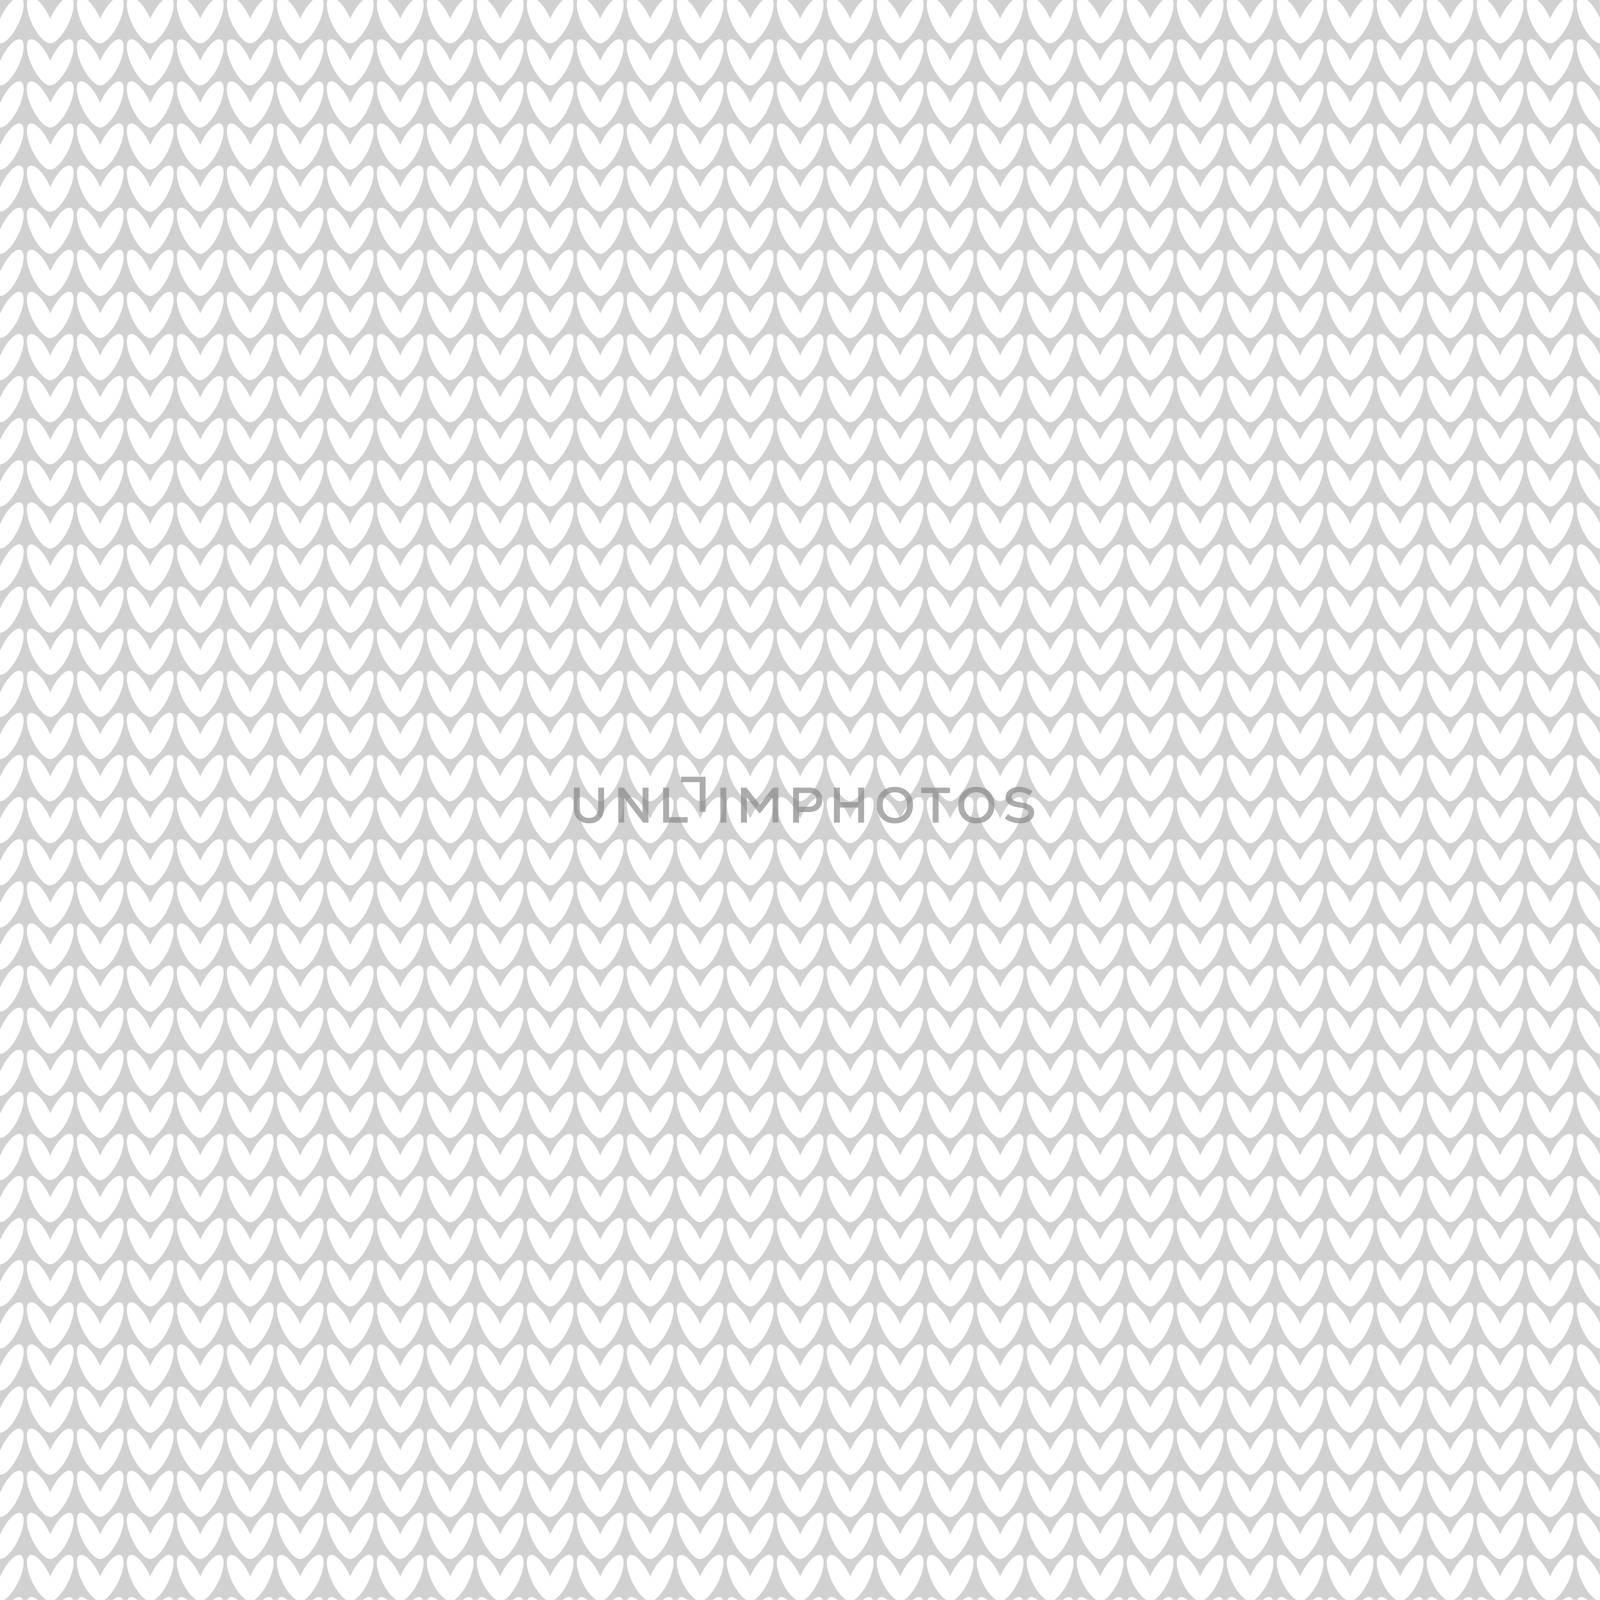 Knitted realistic seamless pattern of white color. Knit texture.